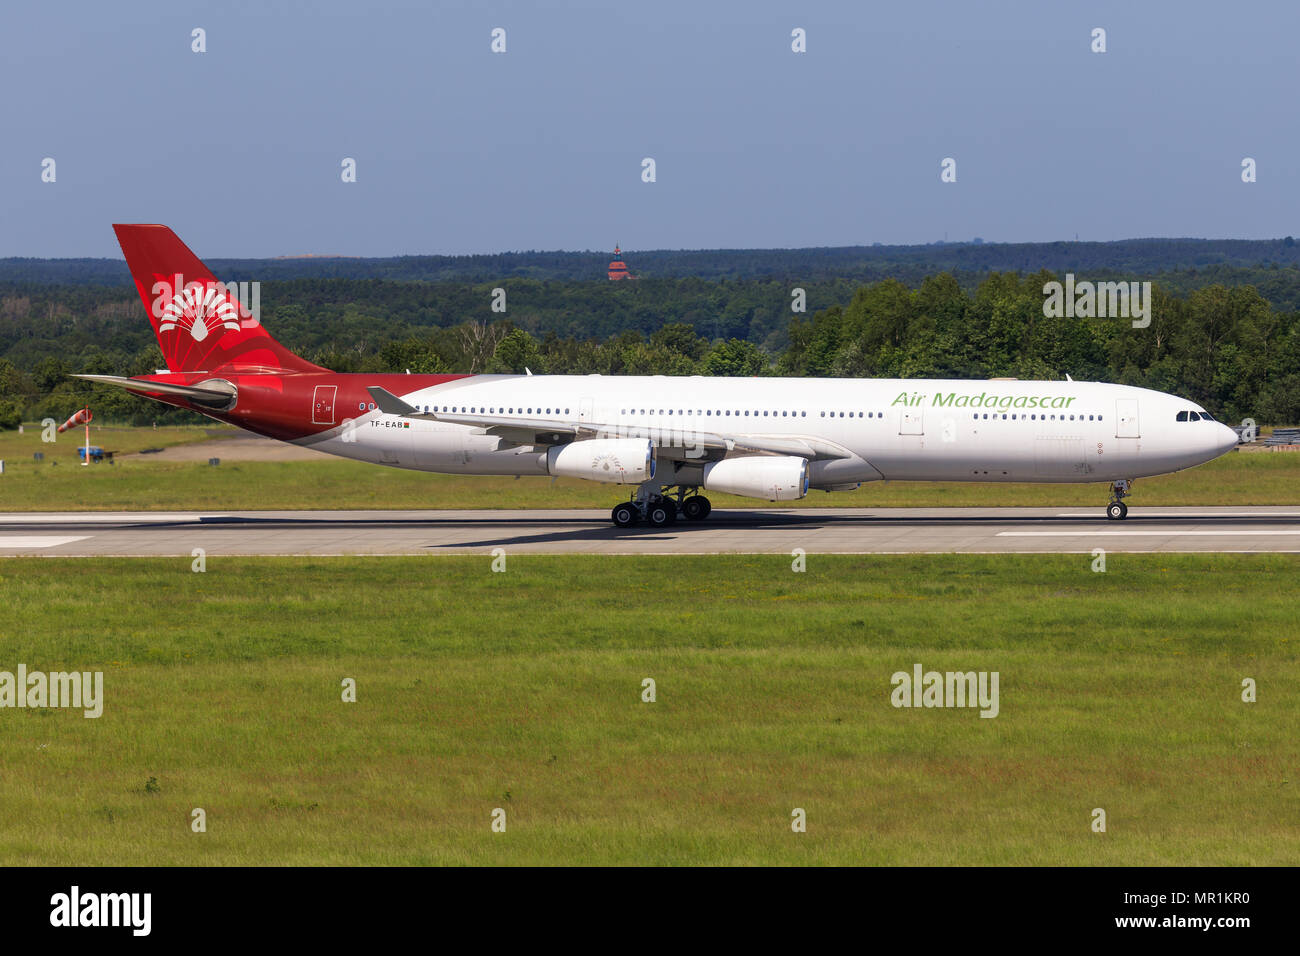 Stuttgart/Germany:Airbus A340 from Air Madagascar at Stuttgart Germany at 19.05.2018 Stock Photo